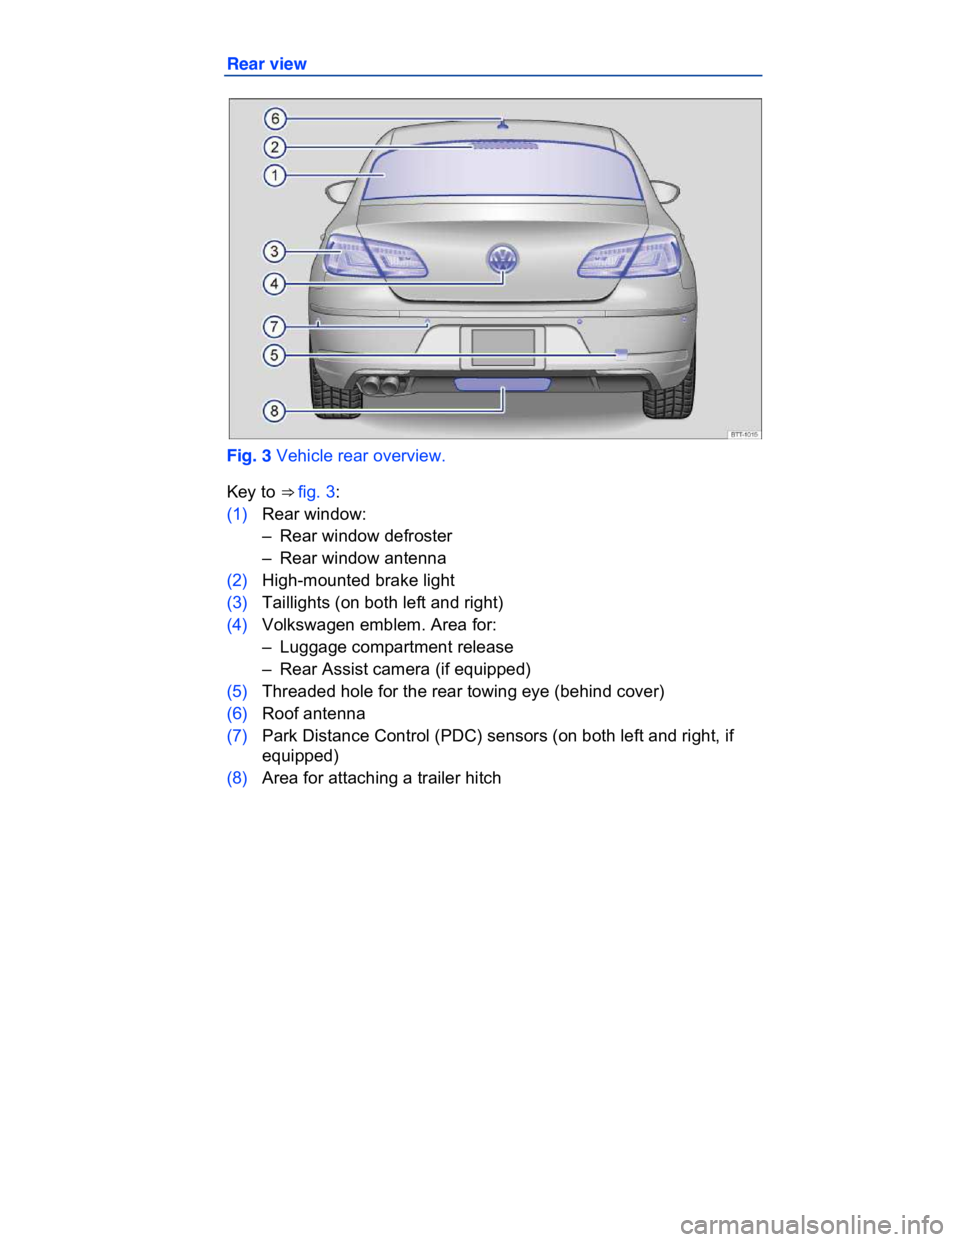 VOLKSWAGEN CC 2014  Owners Manual  
Rear view 
 
Fig. 3 Vehicle rear overview. 
Key to ⇒ fig. 3: 
(1) Rear window: 
–  Rear window defroster  
–  Rear window antenna  
(2) High-mounted brake light 
(3) Taillights (on both left